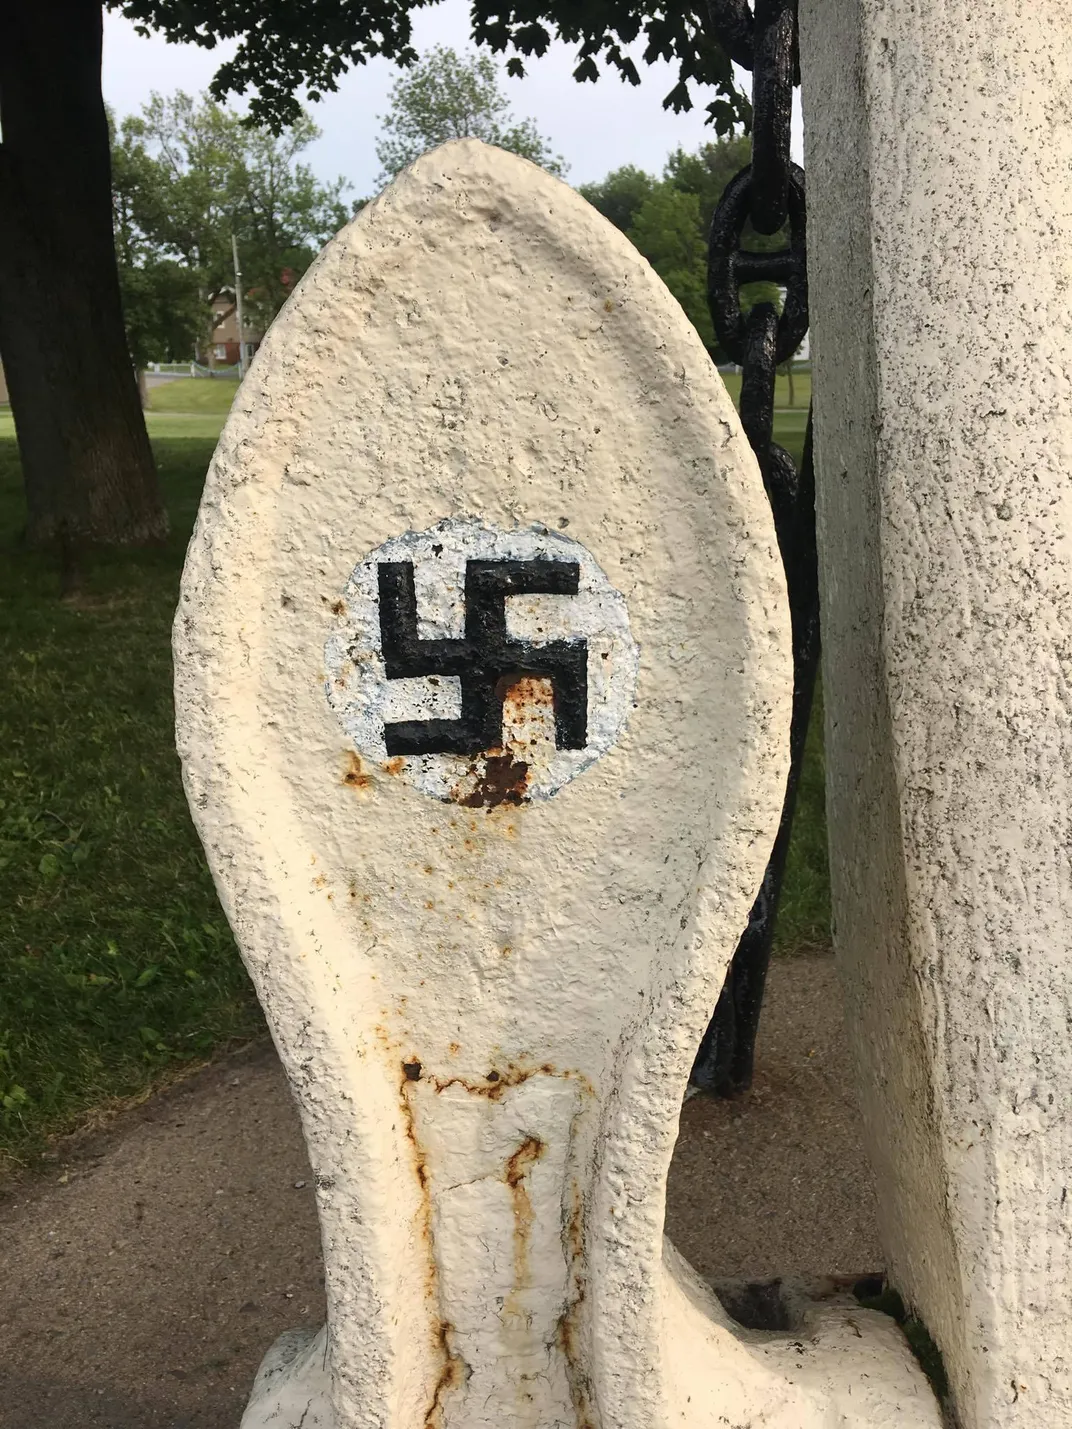 Canadian Town’s Swastika-Adorned Anchor Causes Anger and Confusion 